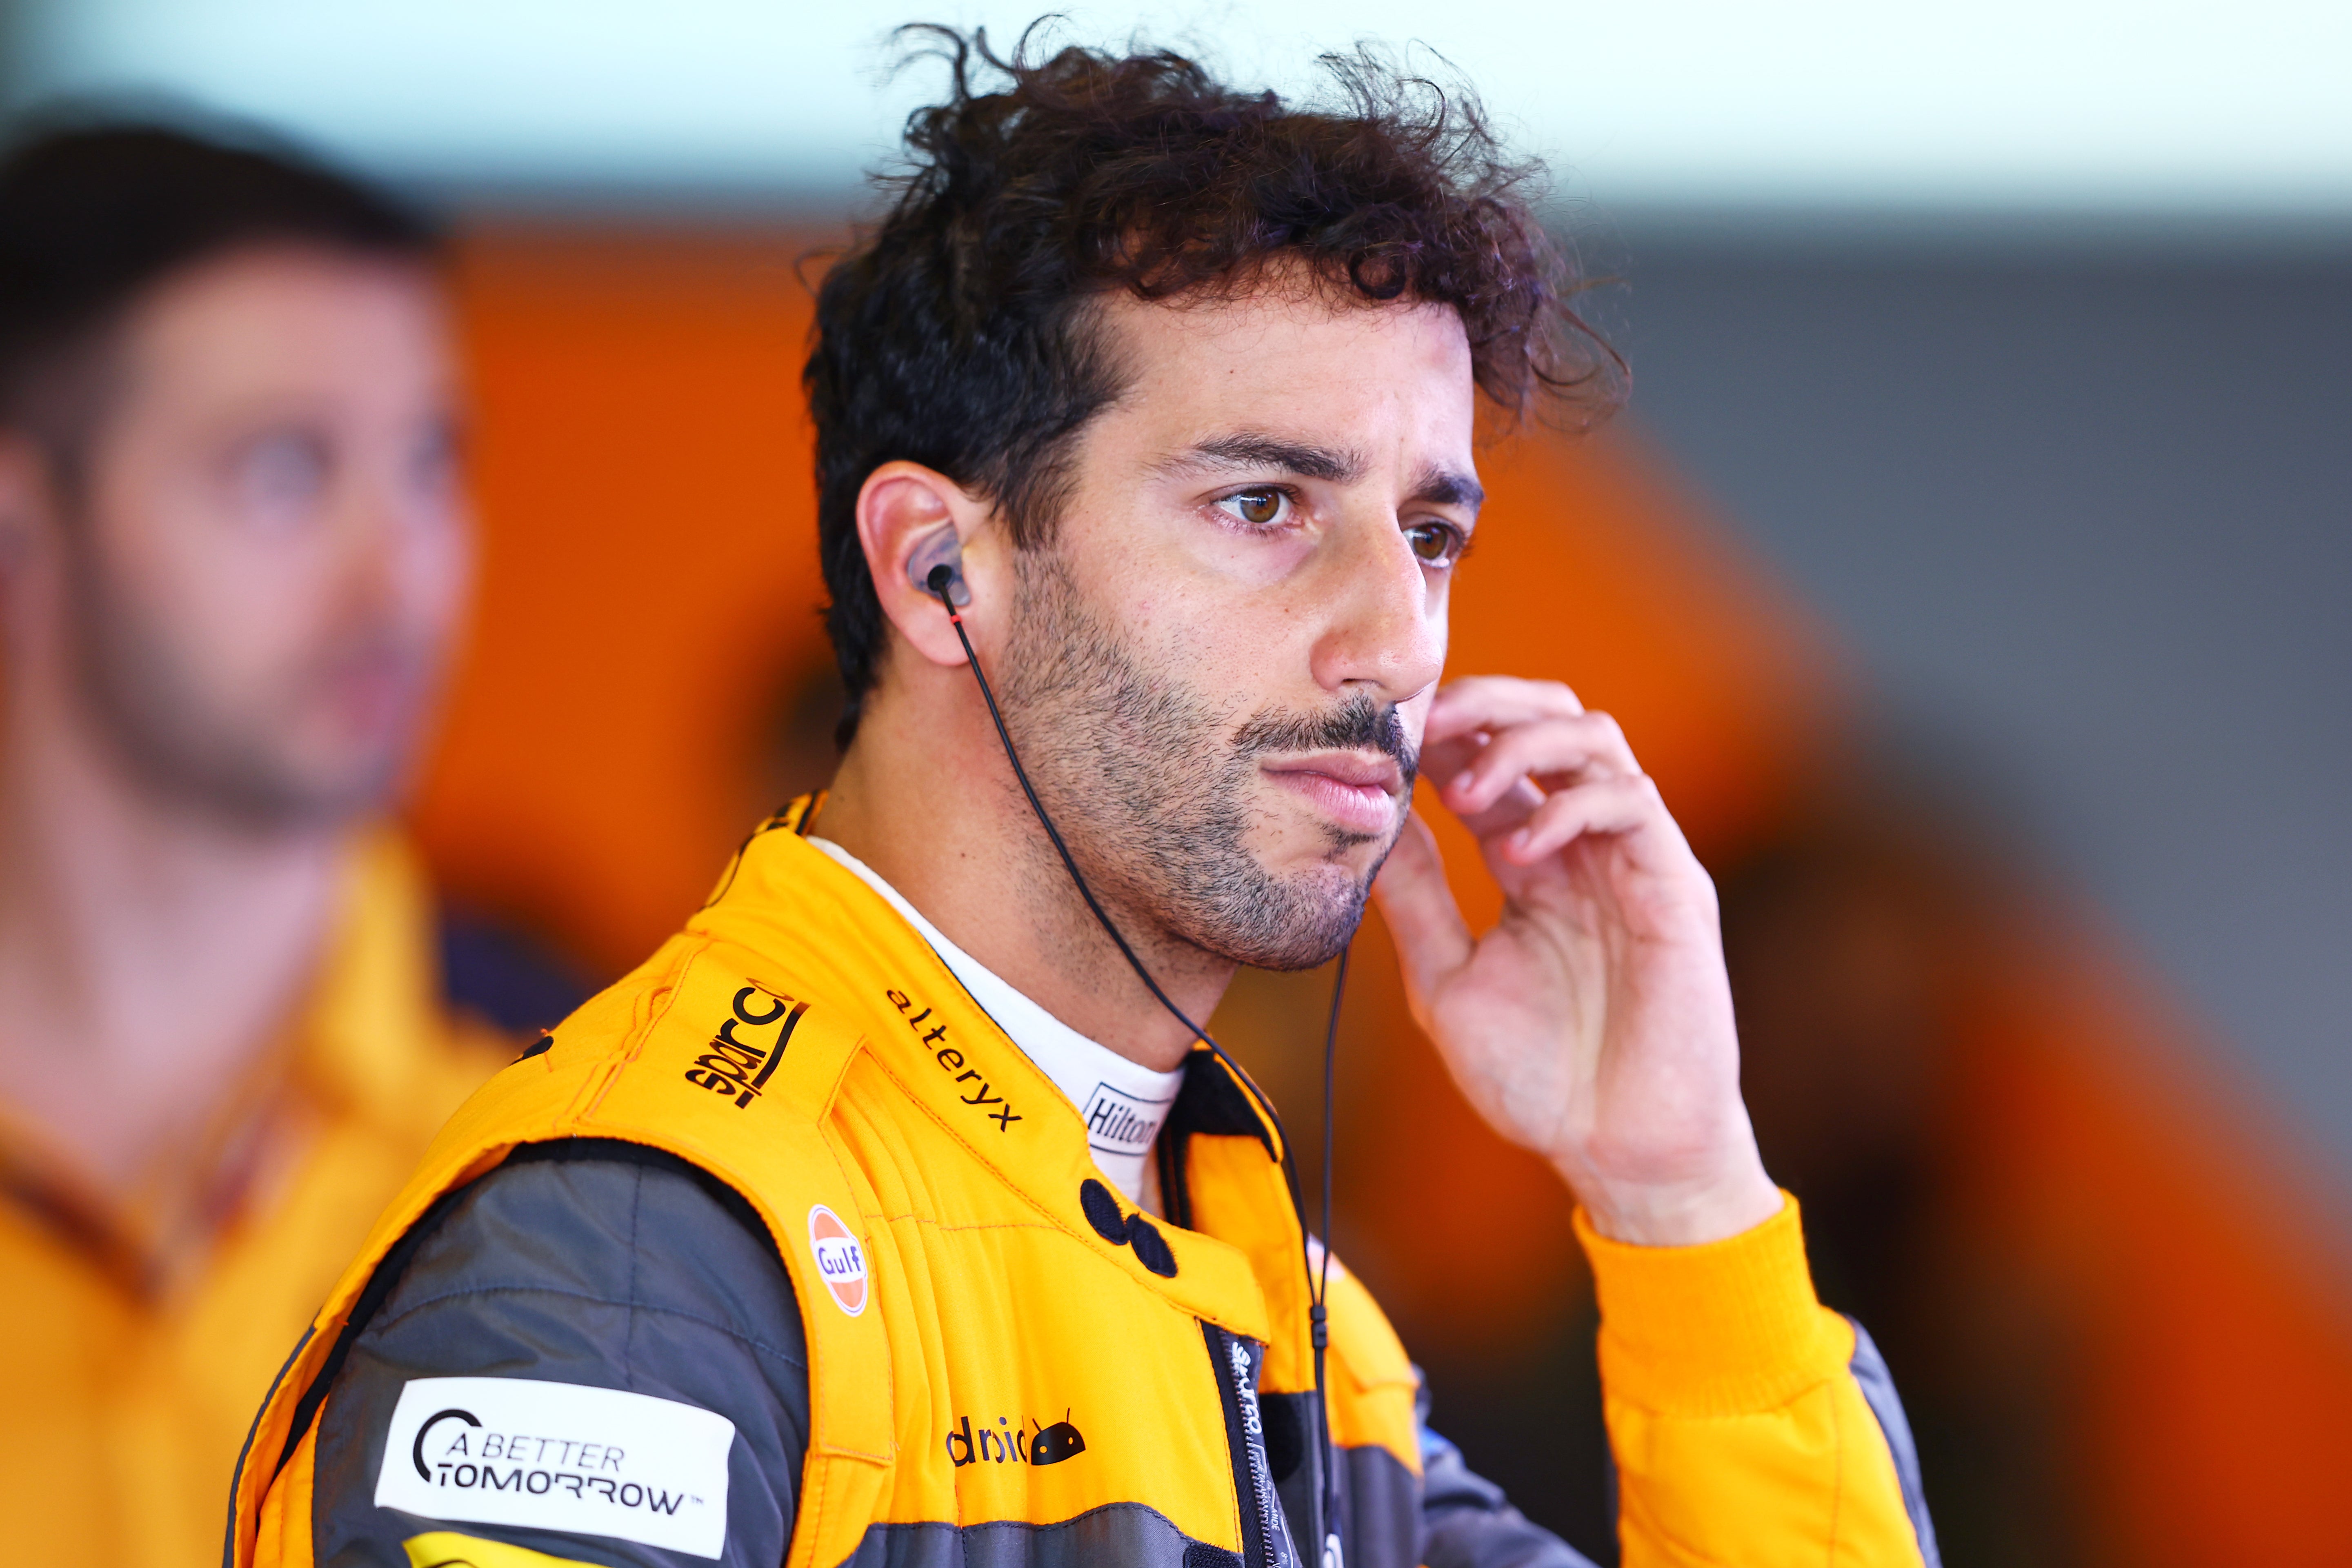 The writing was on the wall for Ricciardo at McLaren after last year’s British Grand Prix